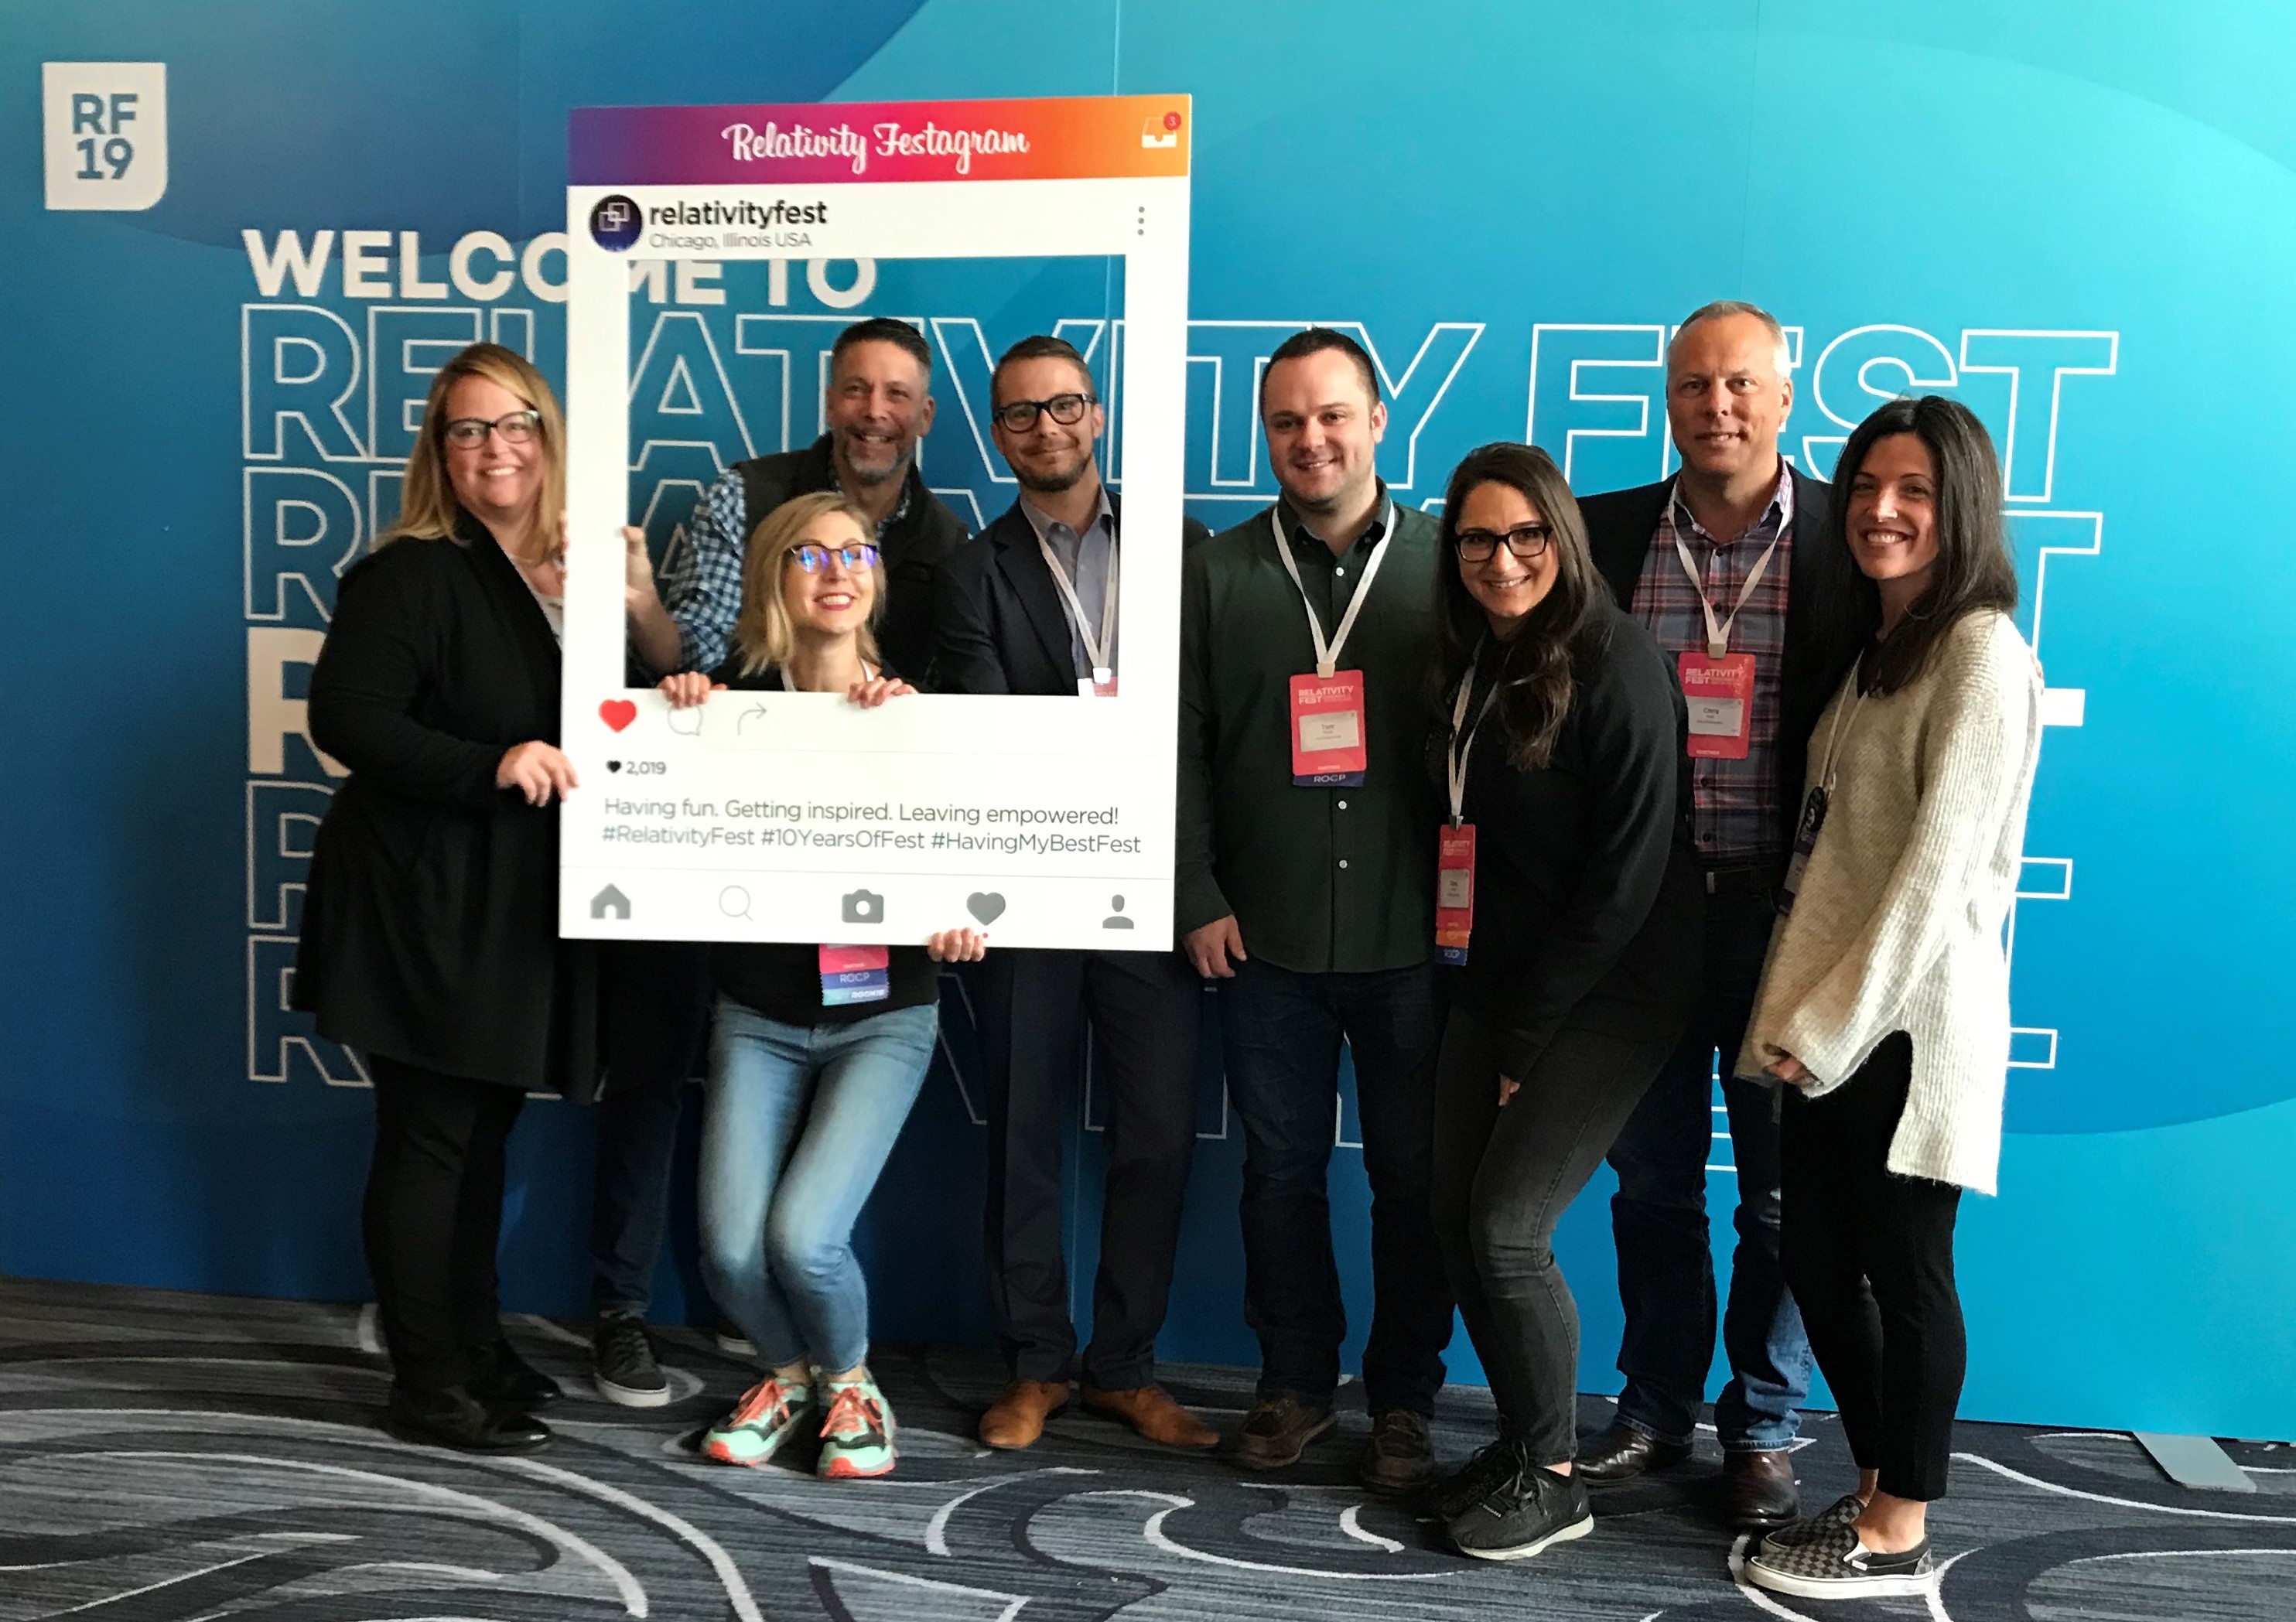 Members of JND eDiscovery team pose for photo at Relativity Fest 2019 marquee.